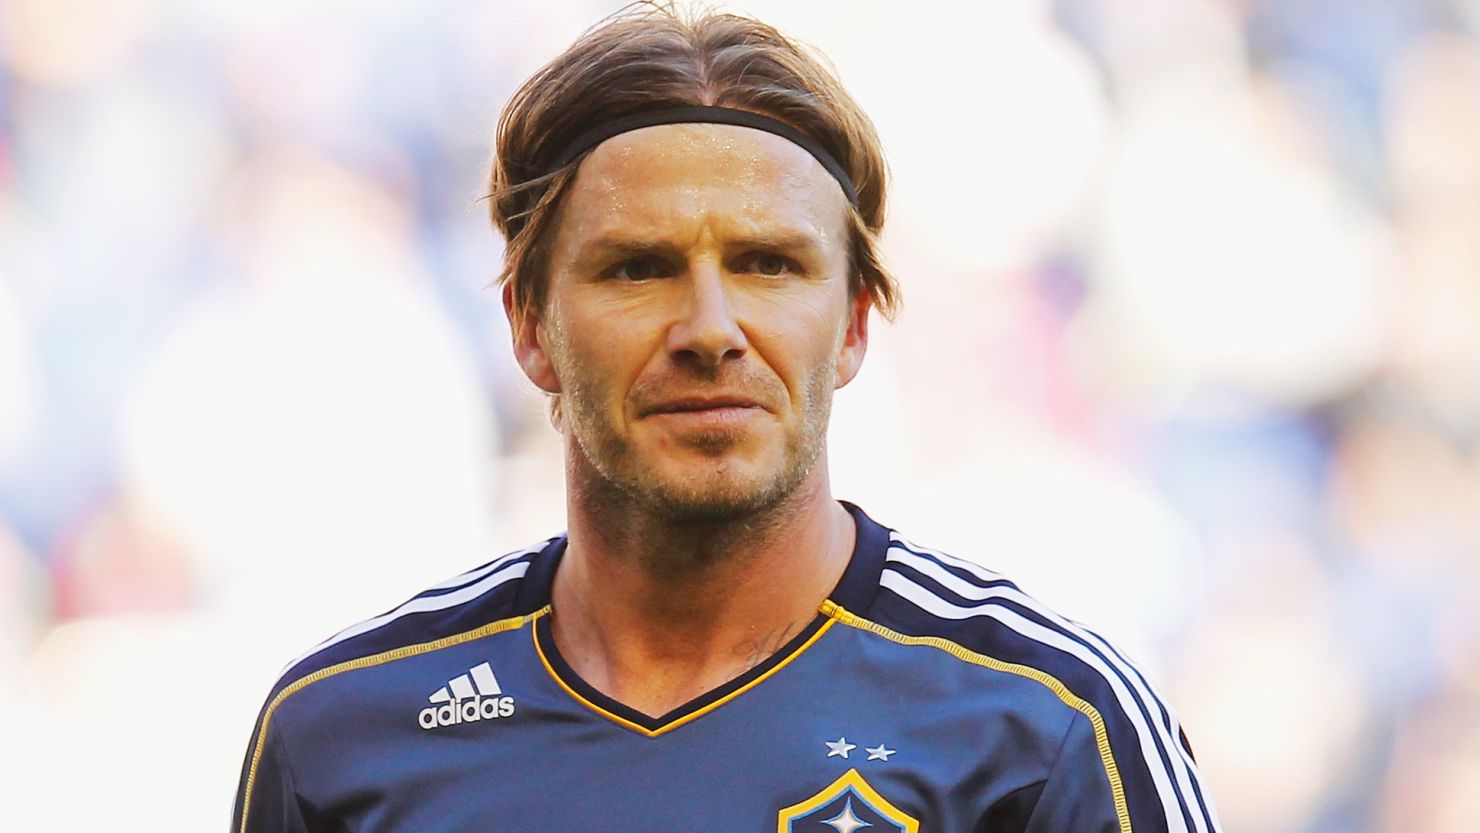 Former England captain David Beckham joined the Galaxy after four years with Real Madrid.